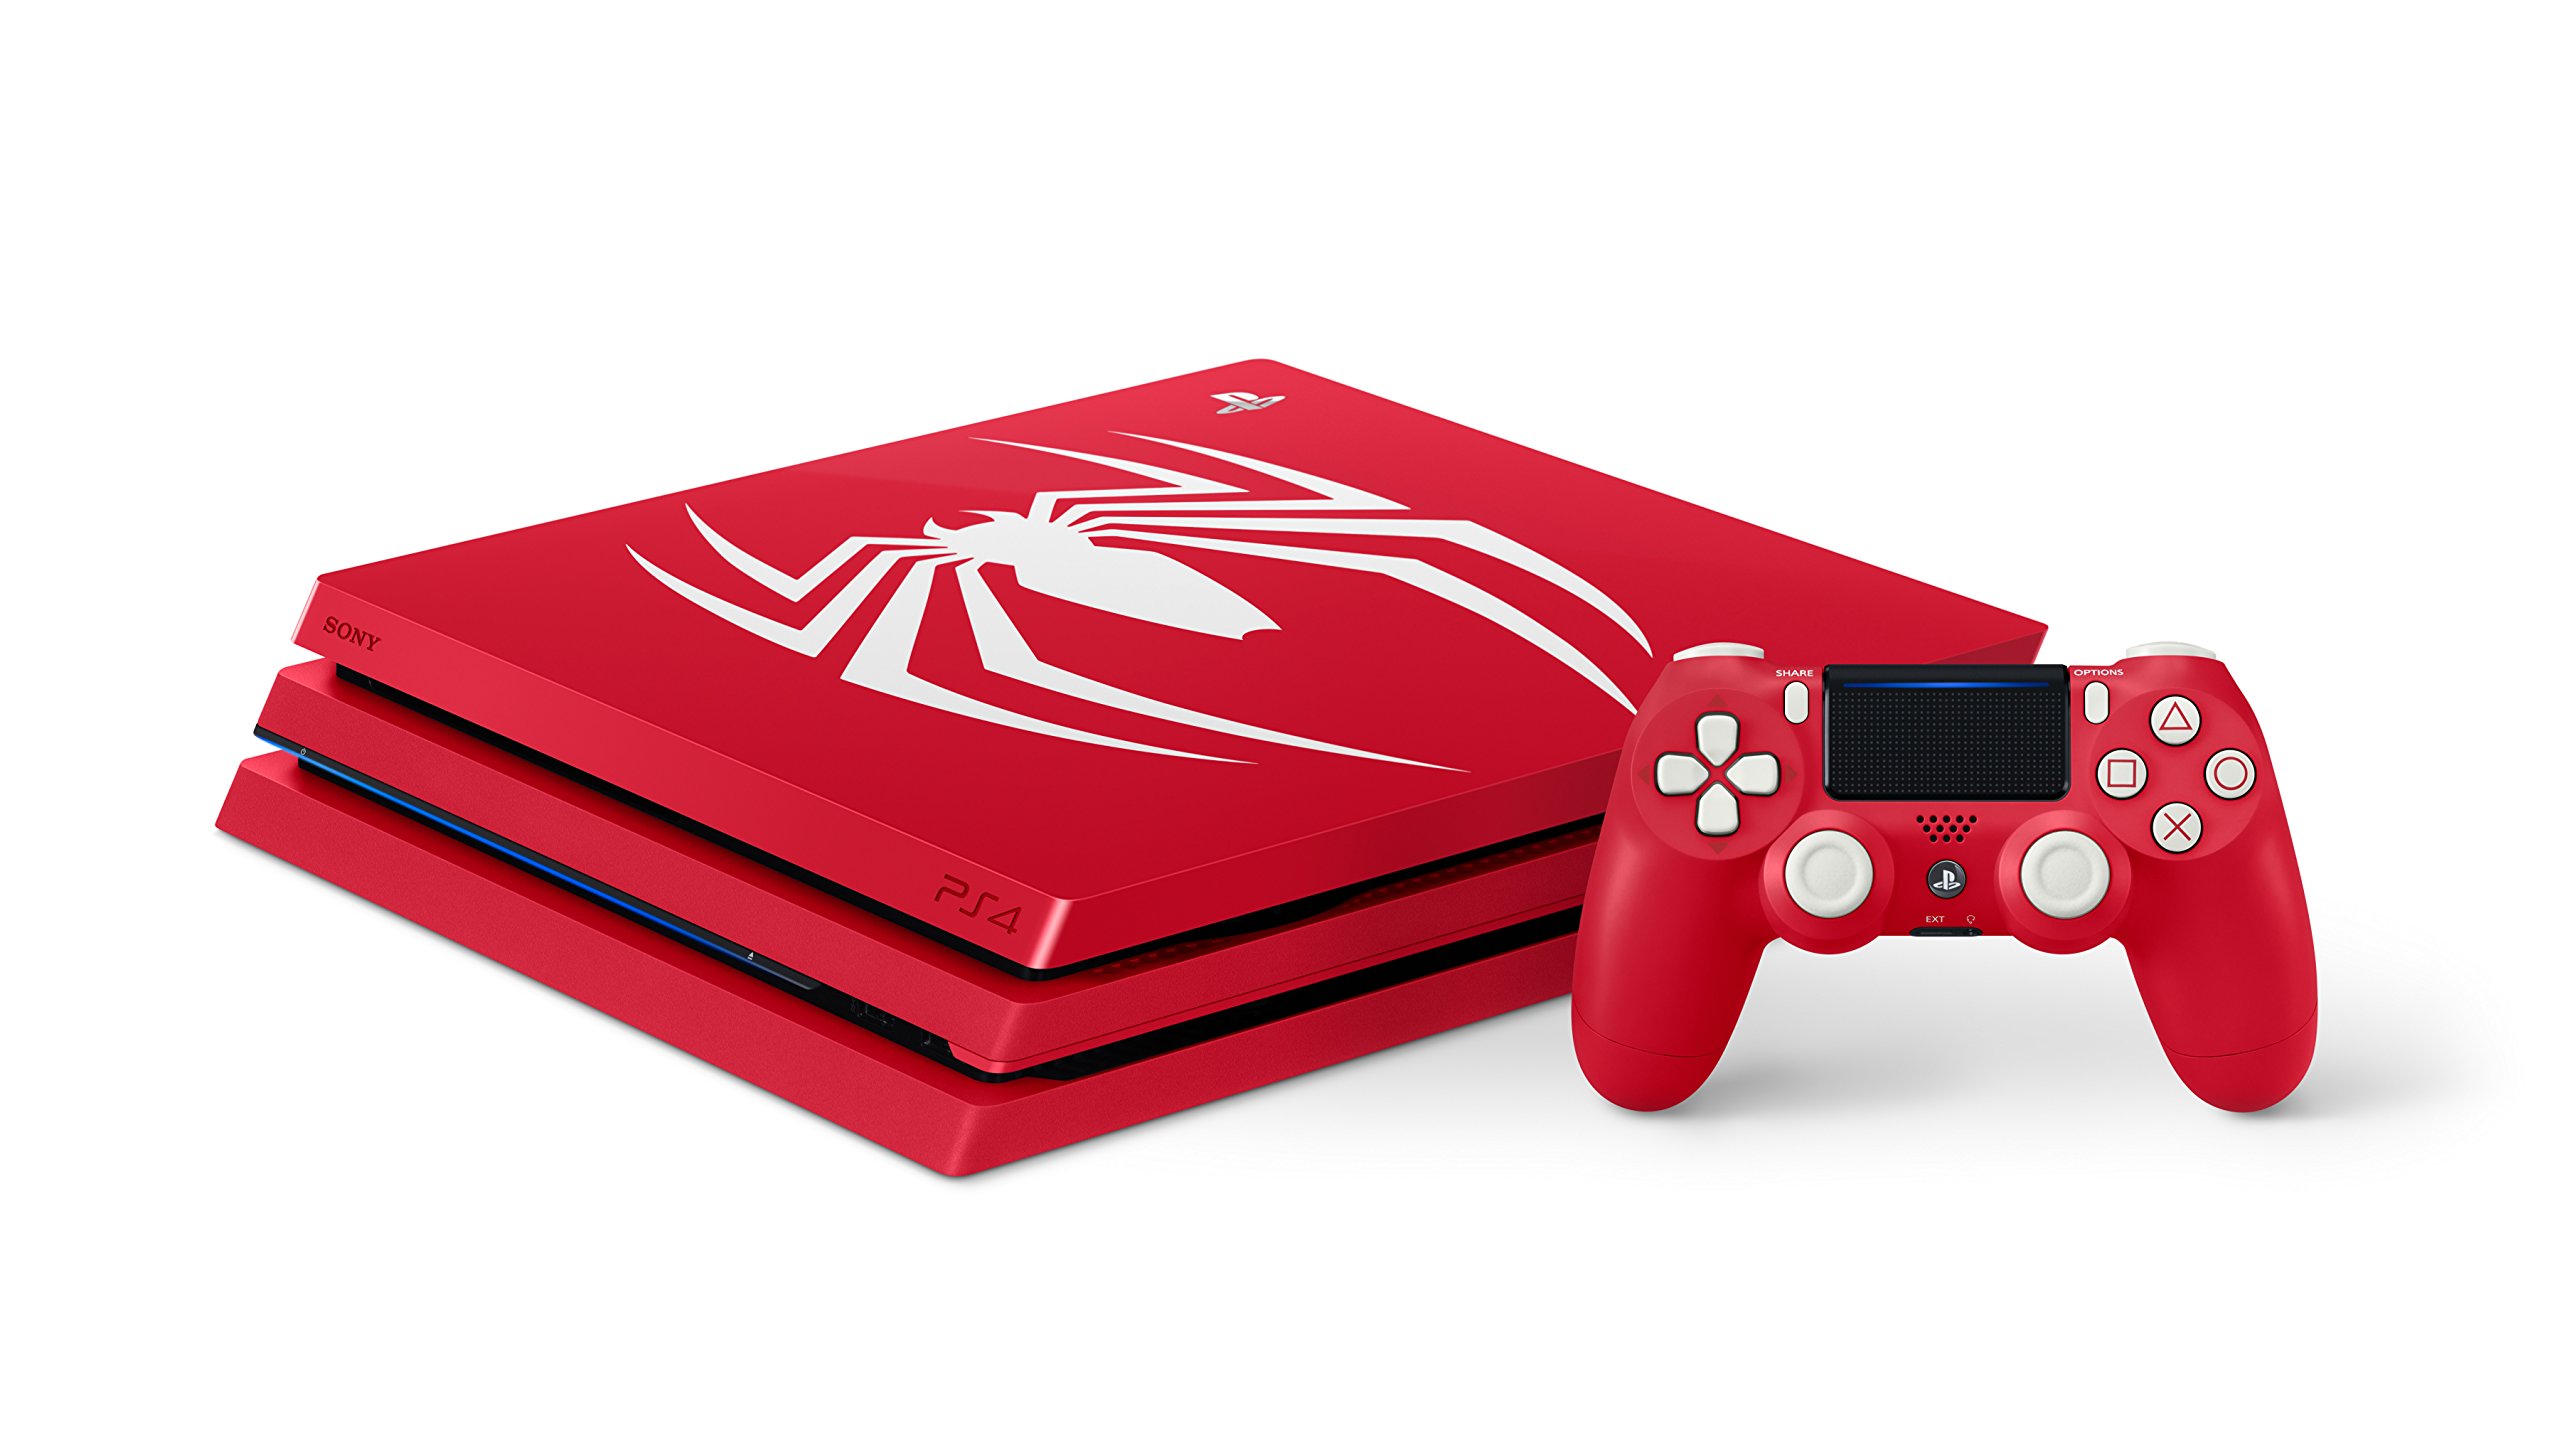 PlayStation 4 Pro 1TB Limited Edition Console - Marvel's Spider-Man Bundle [Discontinued]